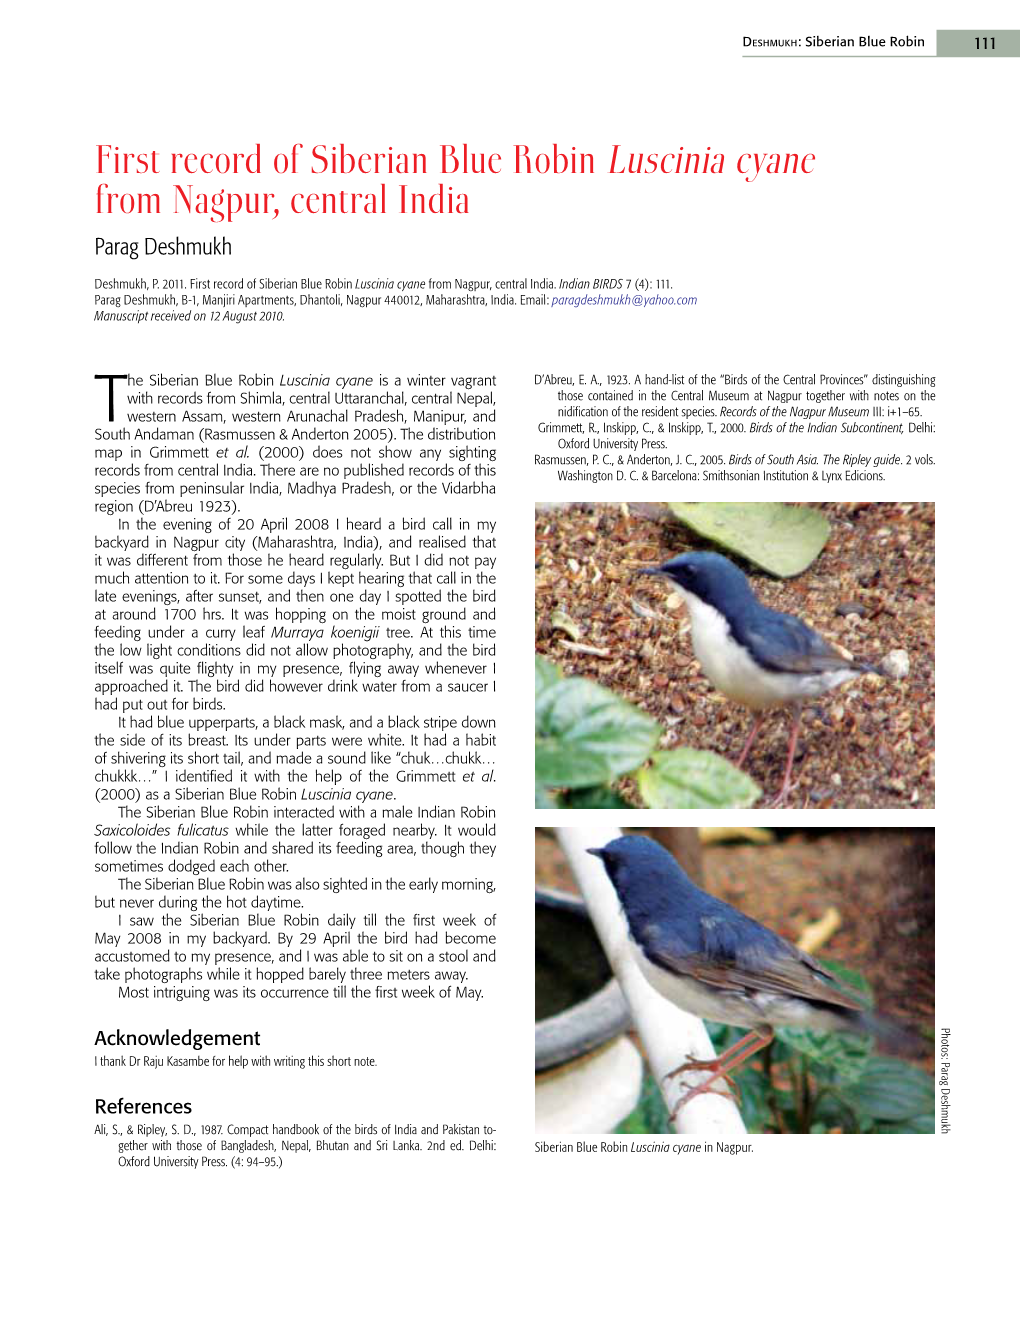 First Record of Siberian Blue Robin Luscinia Cyane from Nagpur, Central India Parag Deshmukh